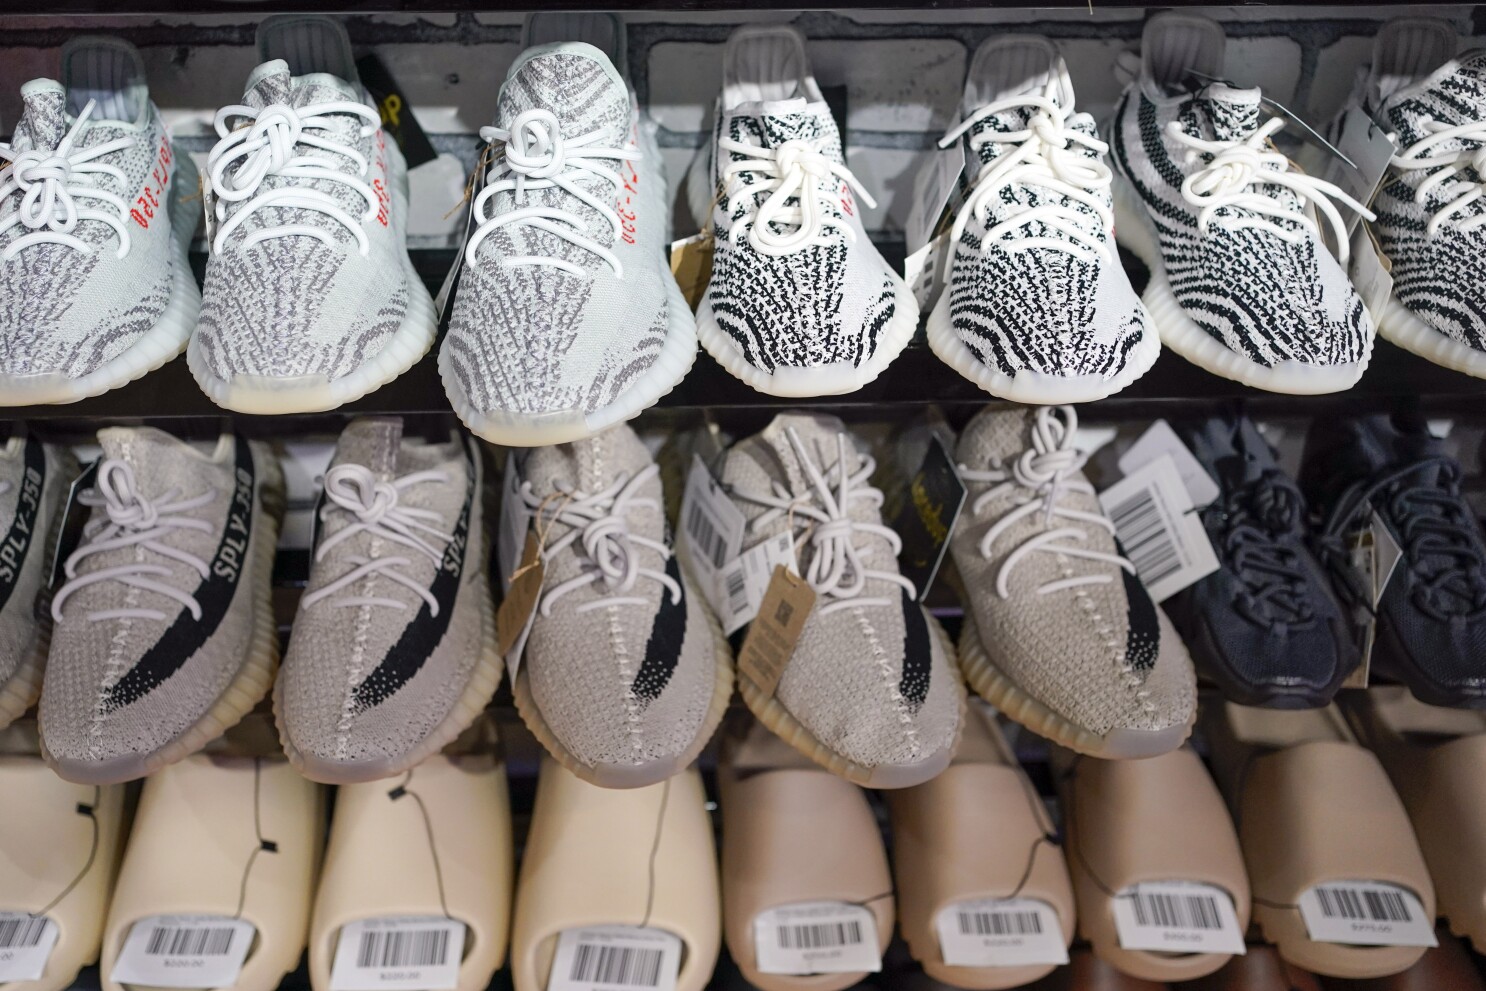 Adidas release second batch of Yeezy sneakers after breakup with Ye | AP News